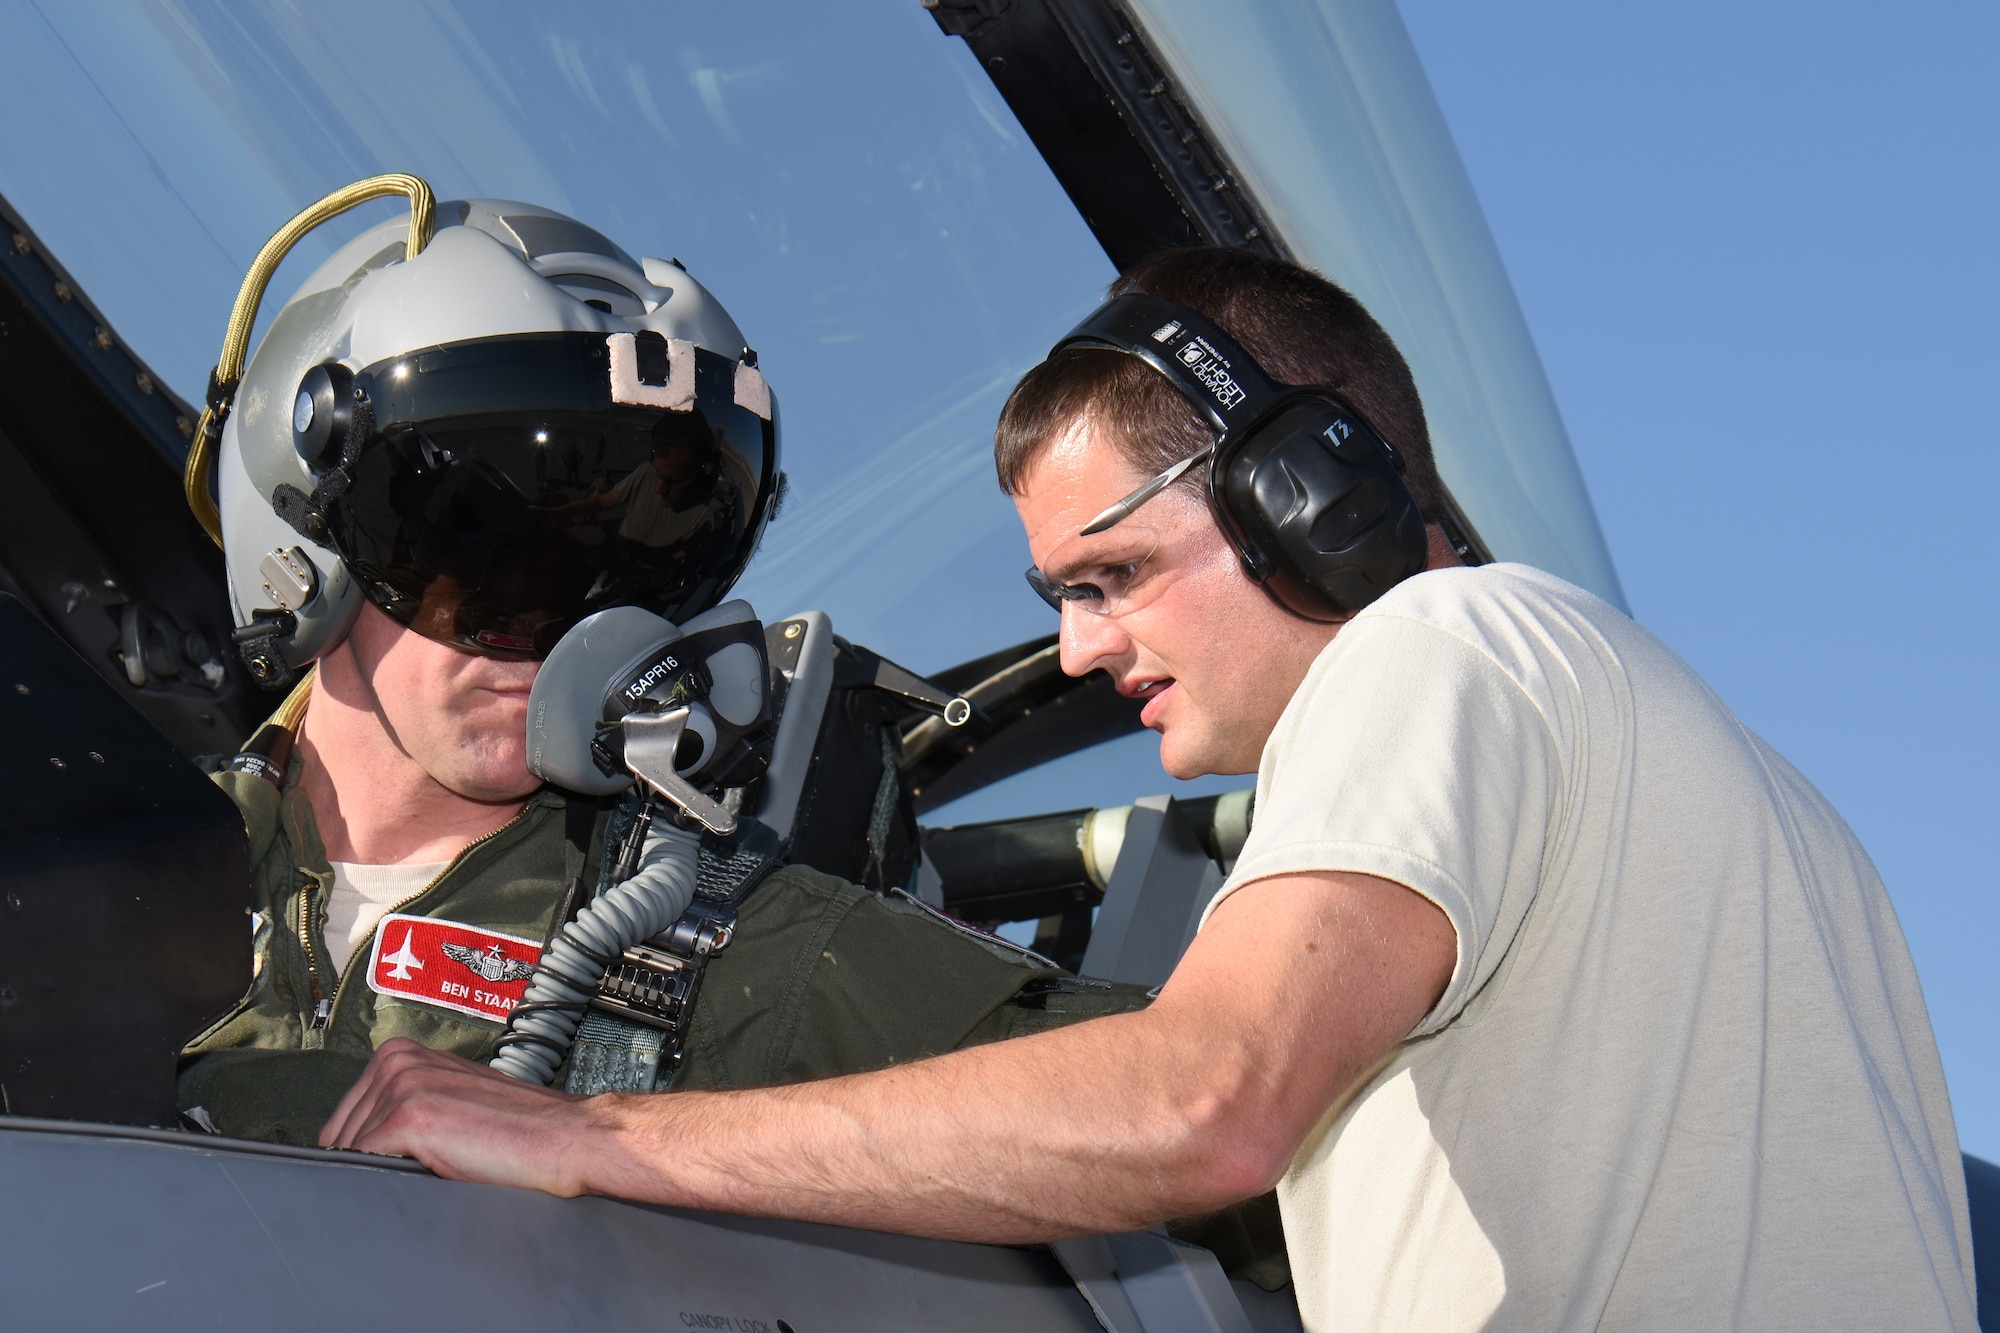 Master Sgt. Michael Lincoln, aircrew egress systems specialist for the 115th Fighter Wing in Madison, Wis., addresses canopy closure issues with Maj. Benjamin Staats, 115 FW pilot, on the aircraft ramp at Nellis Air Force Base, Nev., April 4, 2016. The Wisconsin Air National Guard unit deployed more than 100 Airmen and eight F-16 Fighting Falcons for two weeks to support advanced training in weapons and tactics employment at the United States Air Force Weapons School. (U.S. Air National Guard photo by Master Sgt. Paul Gorman/Released)